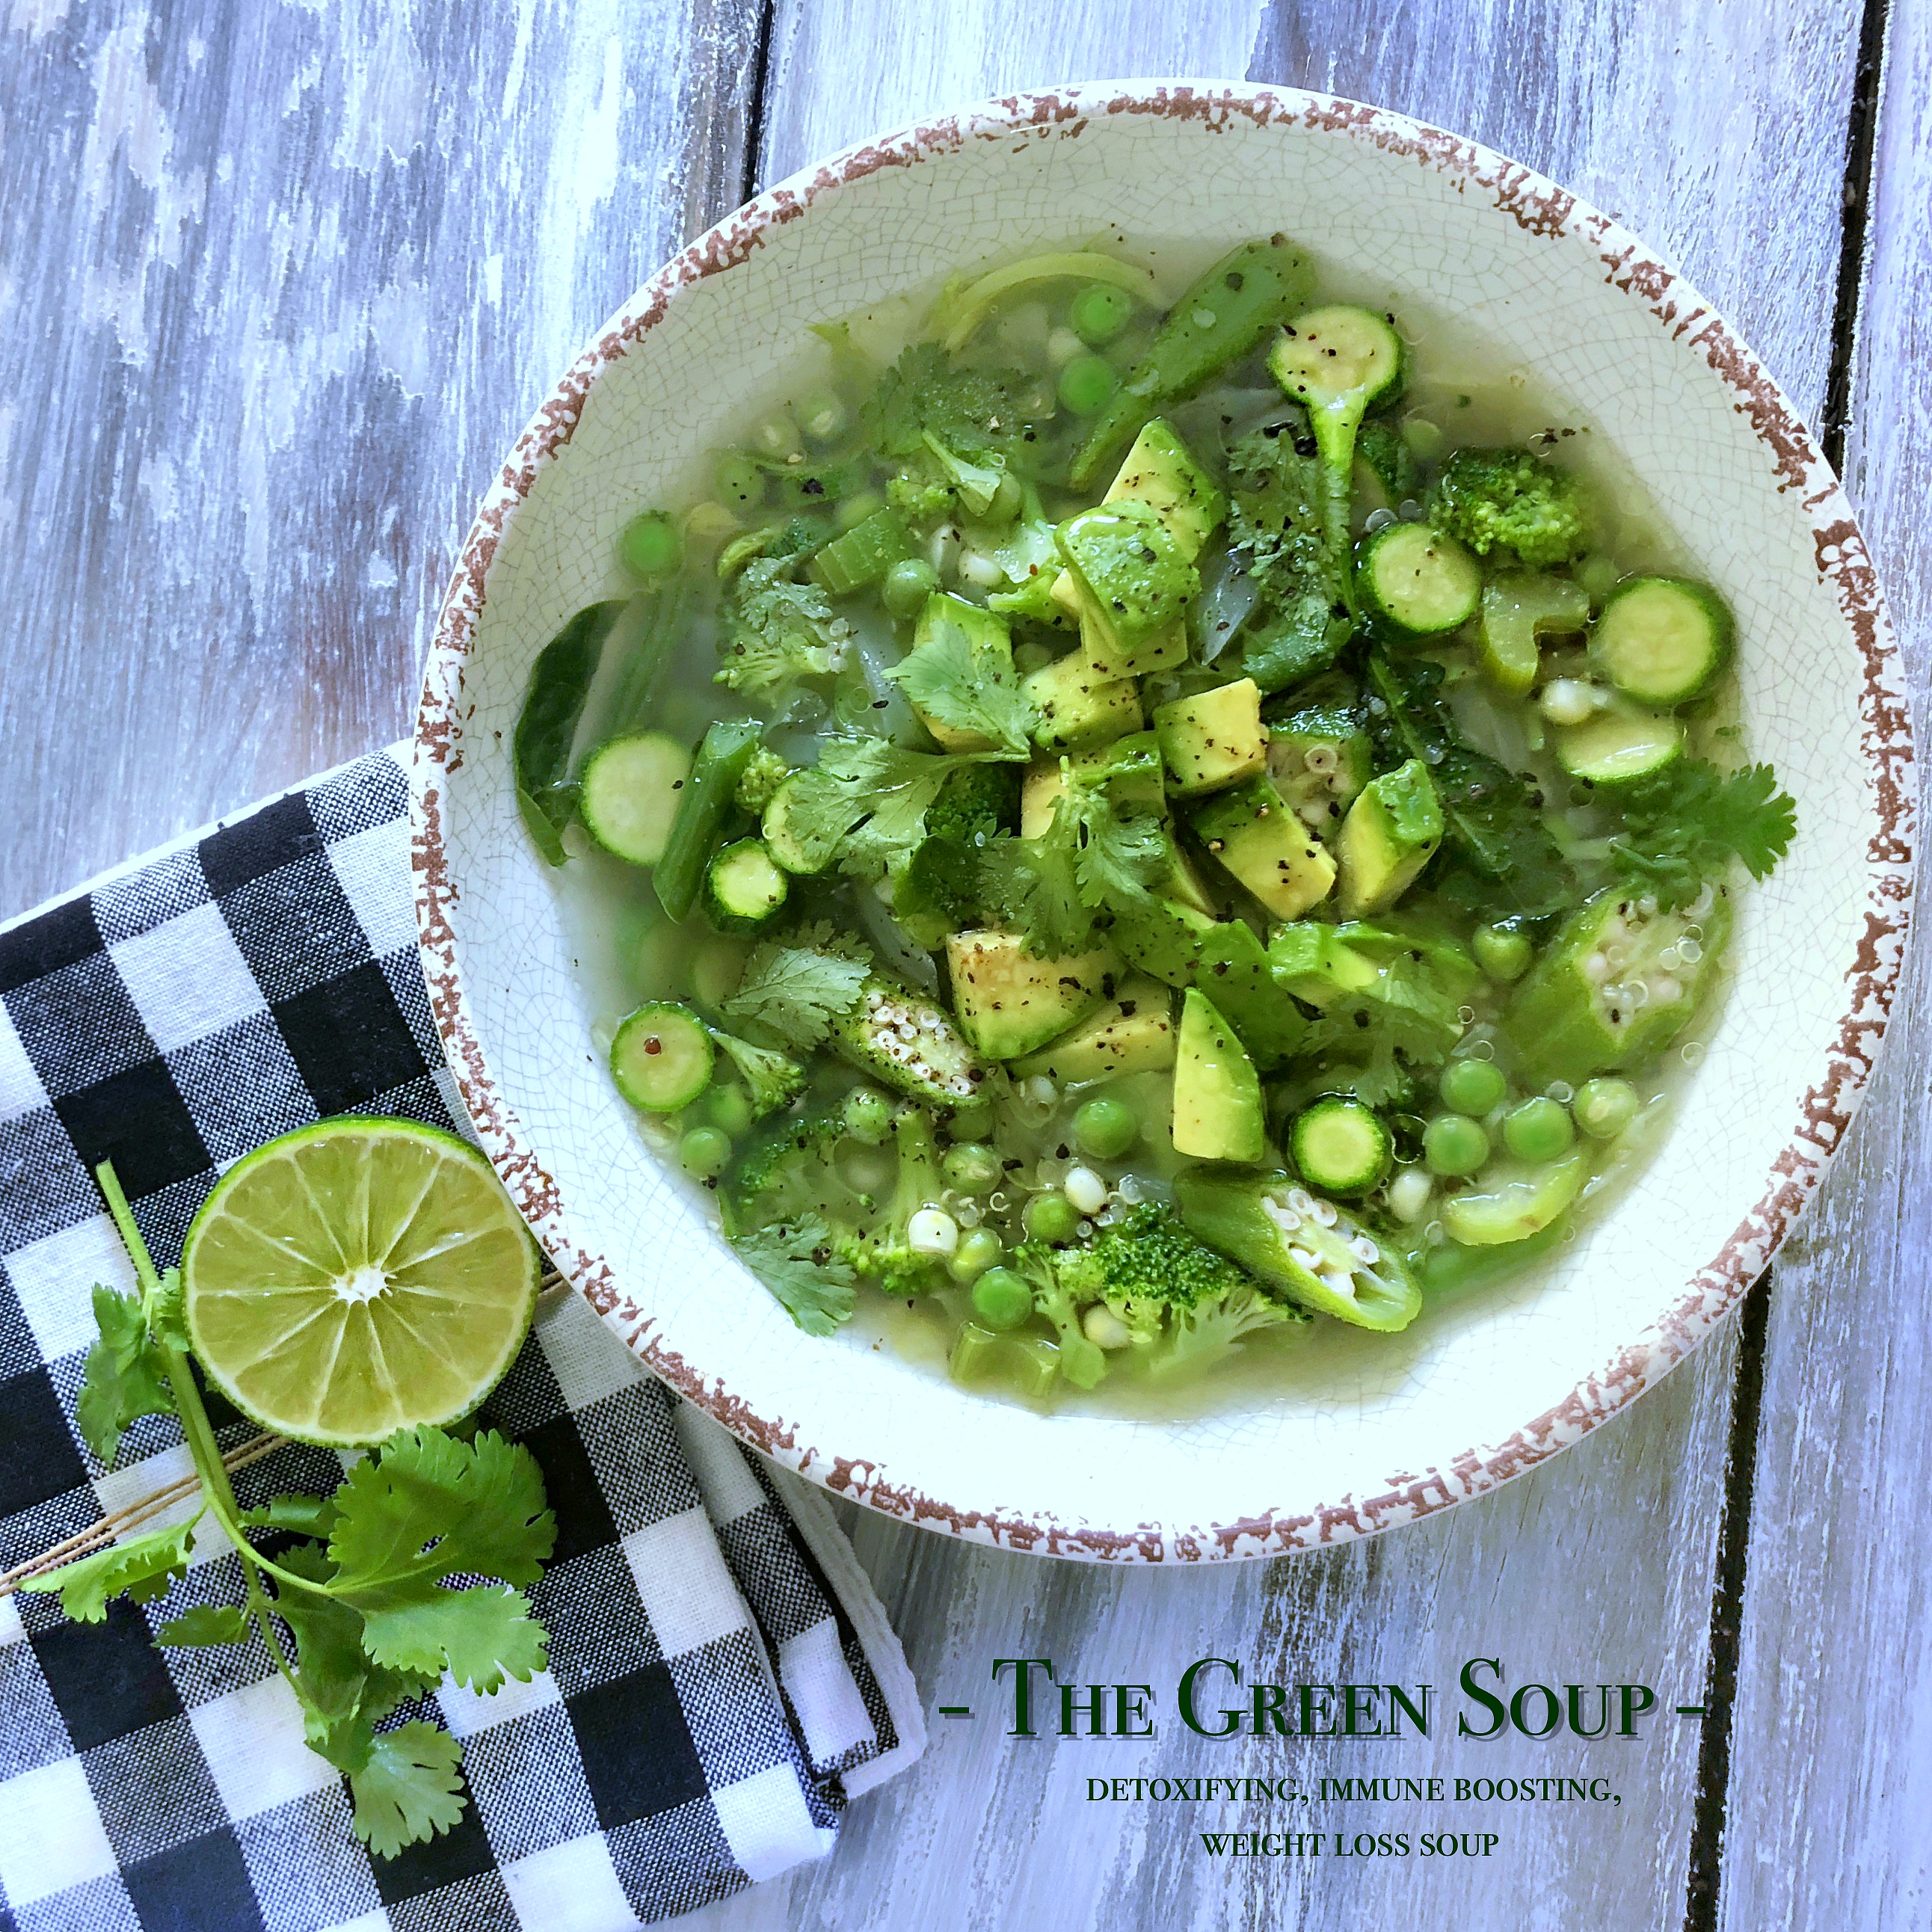 THE GREEN SOUP